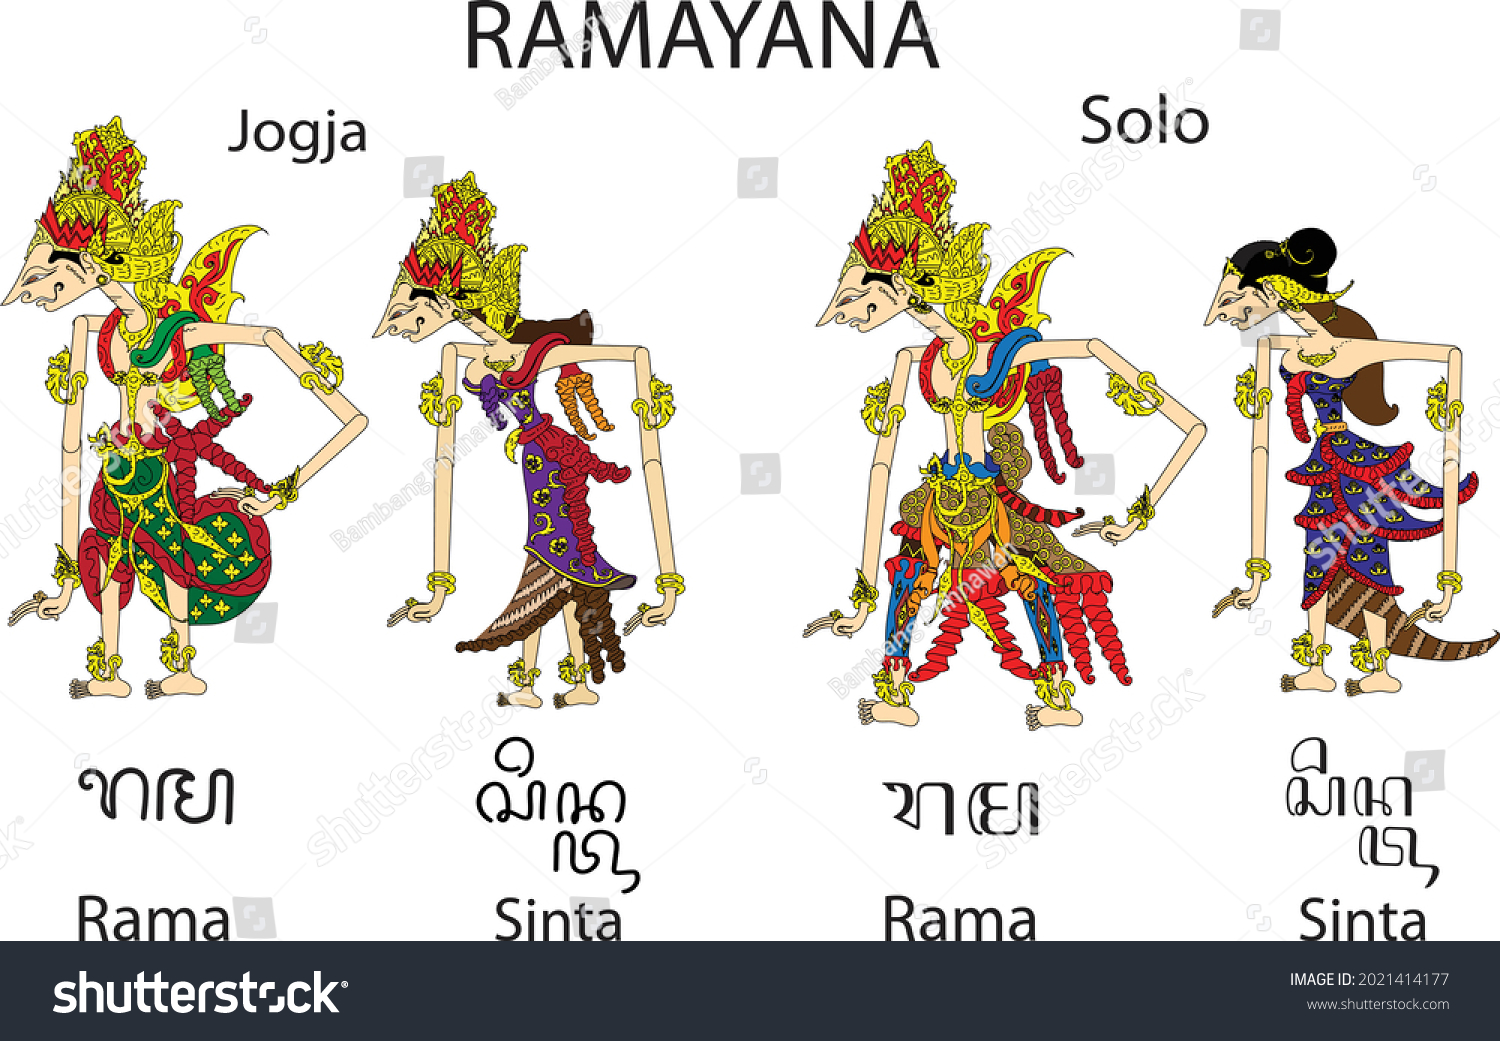  The image shows four Javanese wayang kulit puppets, with Rama and Shinta from the Ramayana epic.